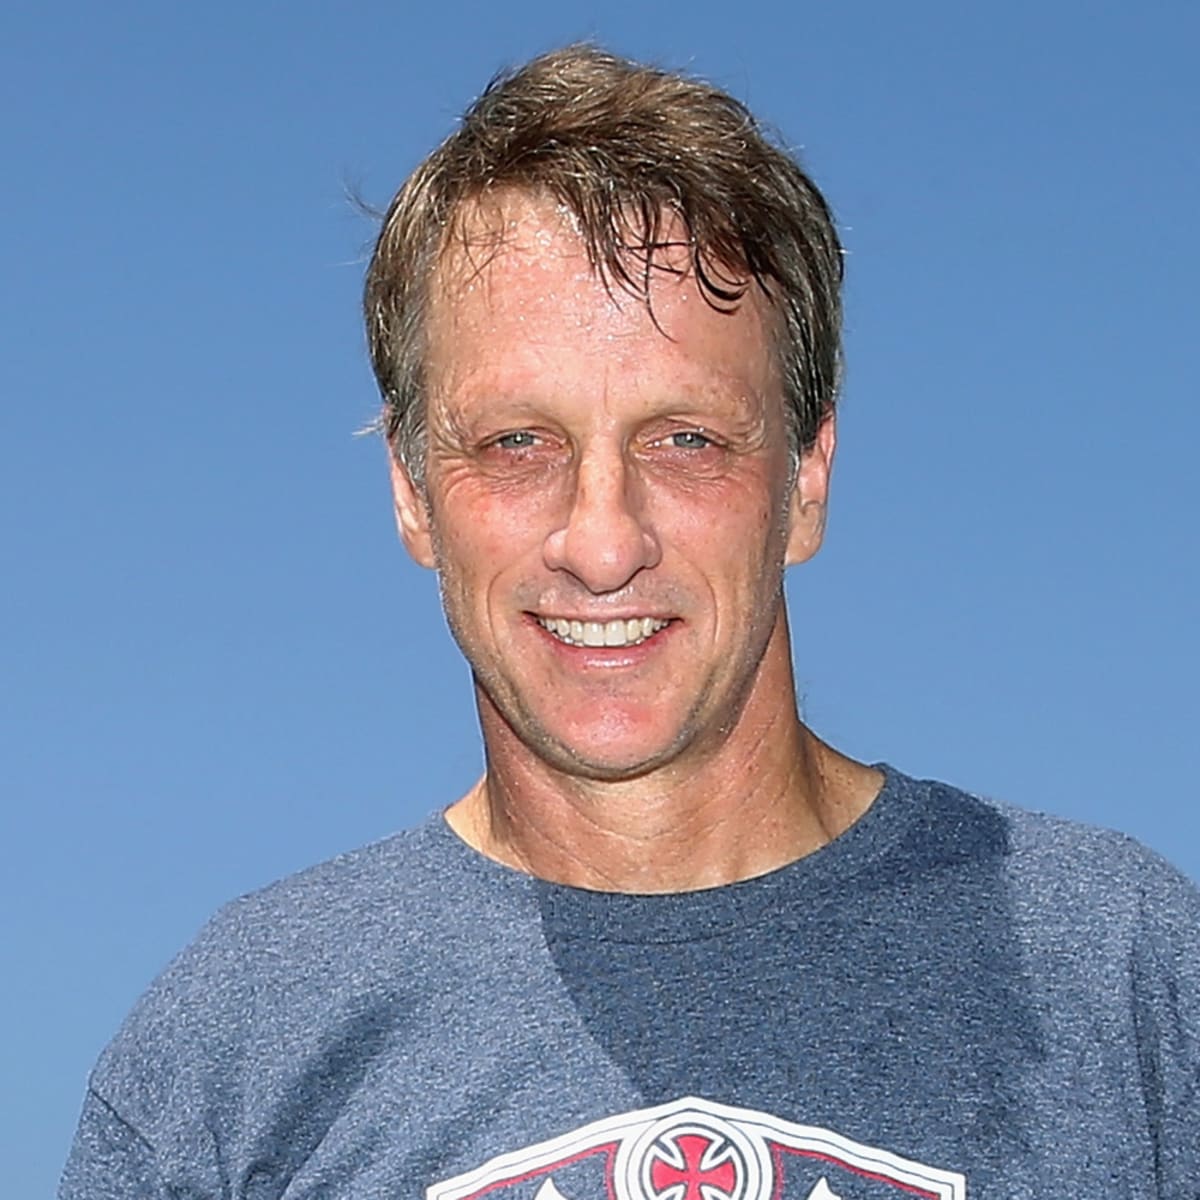 The former Skateboard player Tony Hawk has amassed a huge net worth of $140 million.